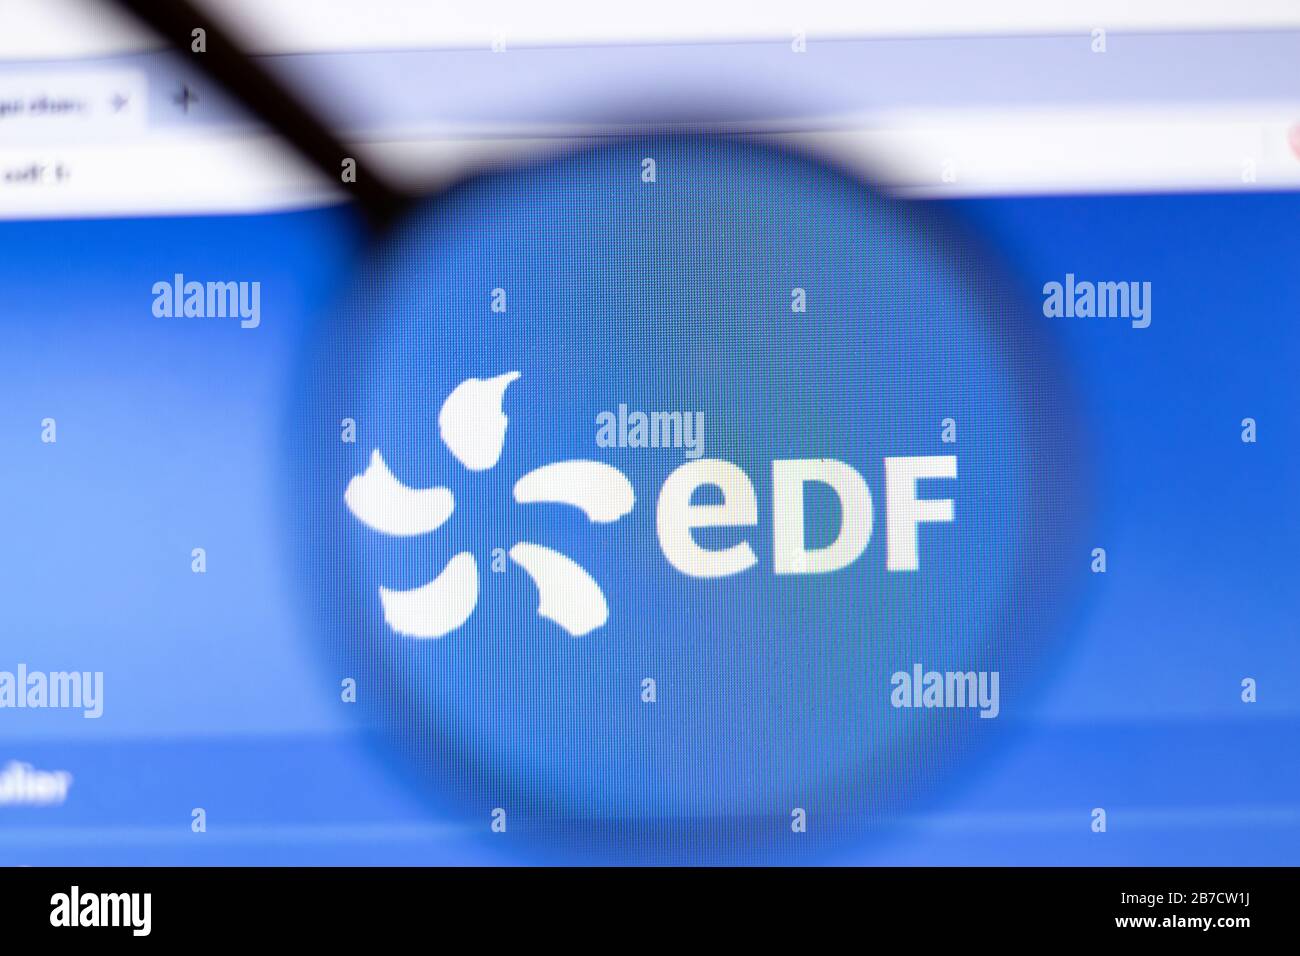 Los Angeles, California, USA - 15 March 2020: Electricite de France icon on website page. Edf.fr logo visible on display screen, Illustrative Stock Photo